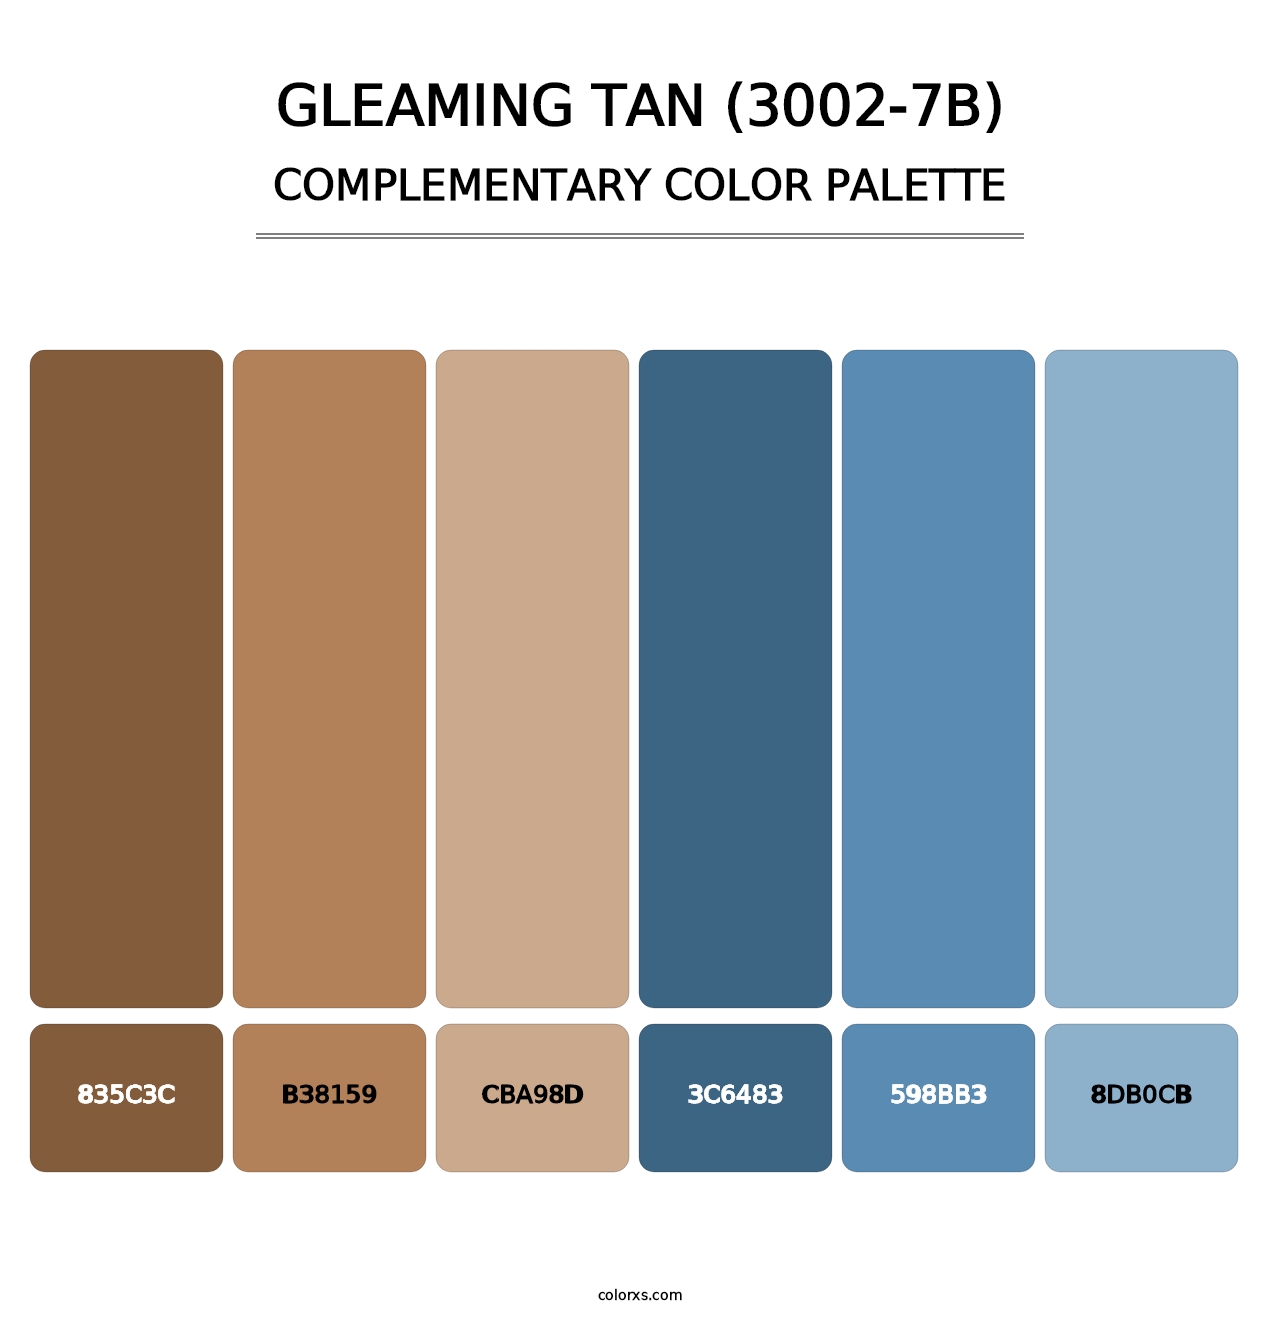 Gleaming Tan (3002-7B) - Complementary Color Palette